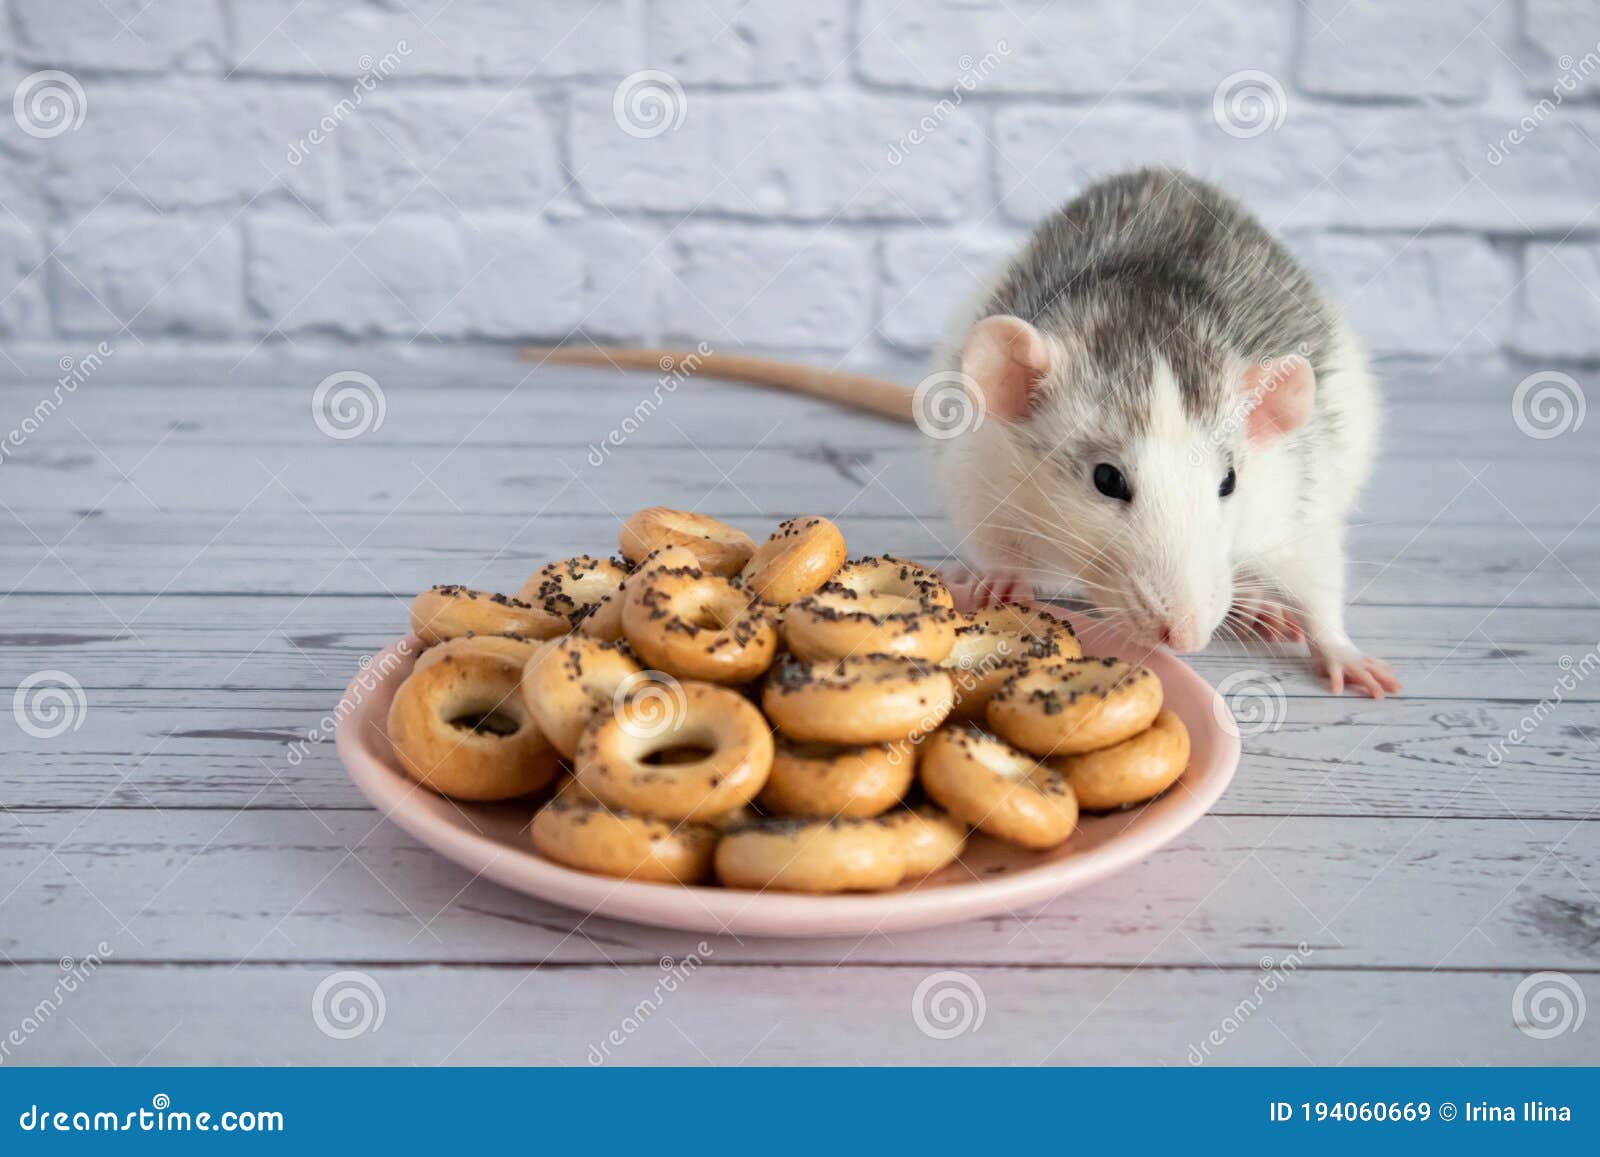 Decorative Black and White Cute Rat Sniffs and Eats Round Bagels ...